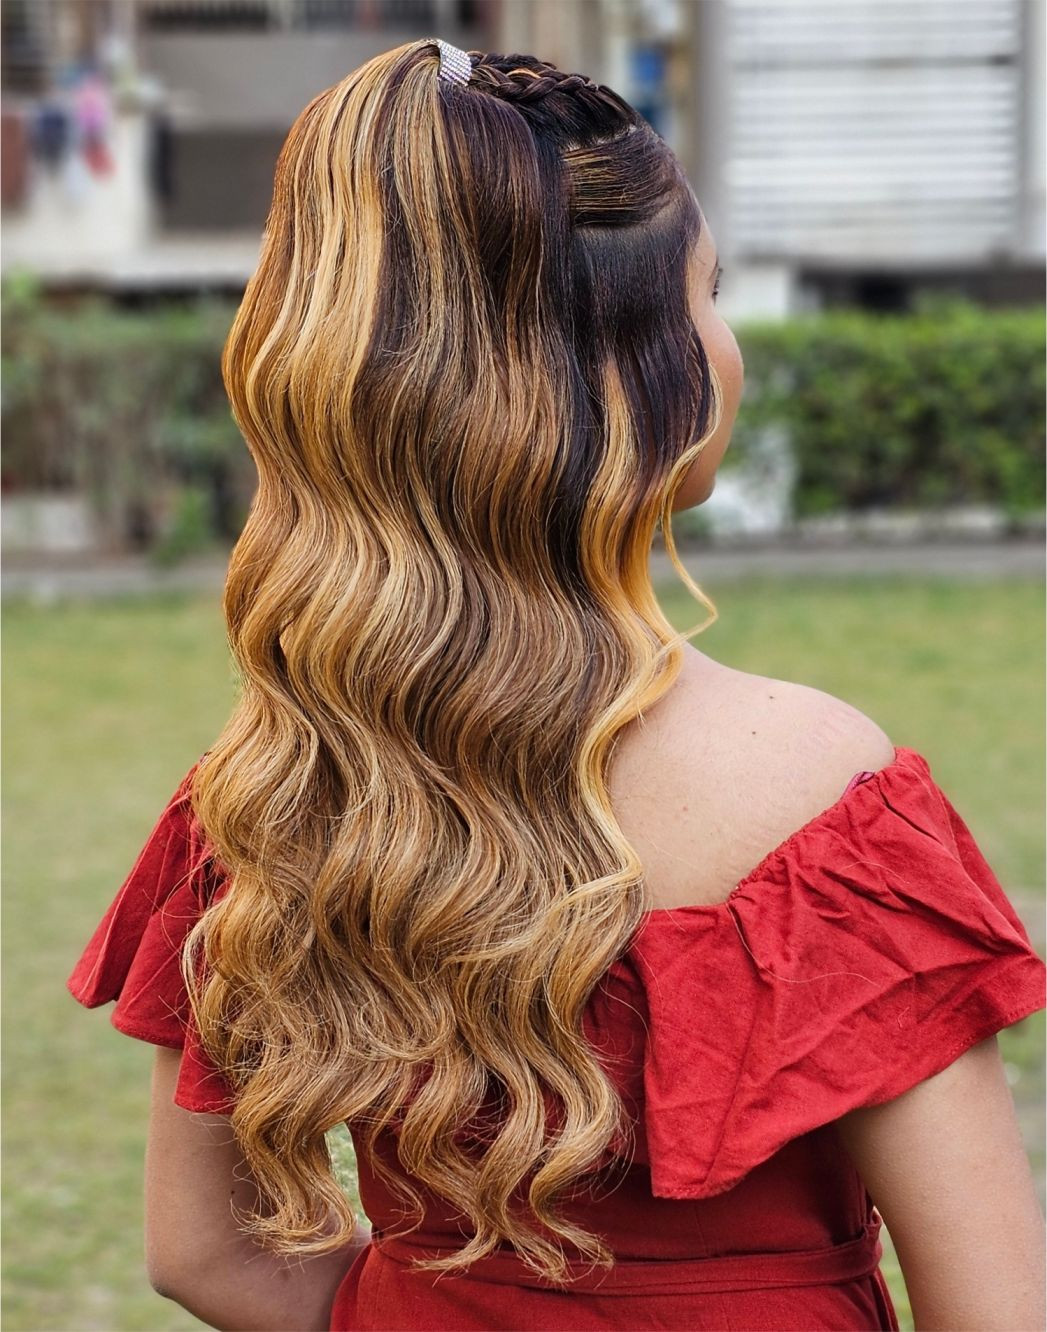 Pony Tail With Wavy Curls Hair Style - Rl0041